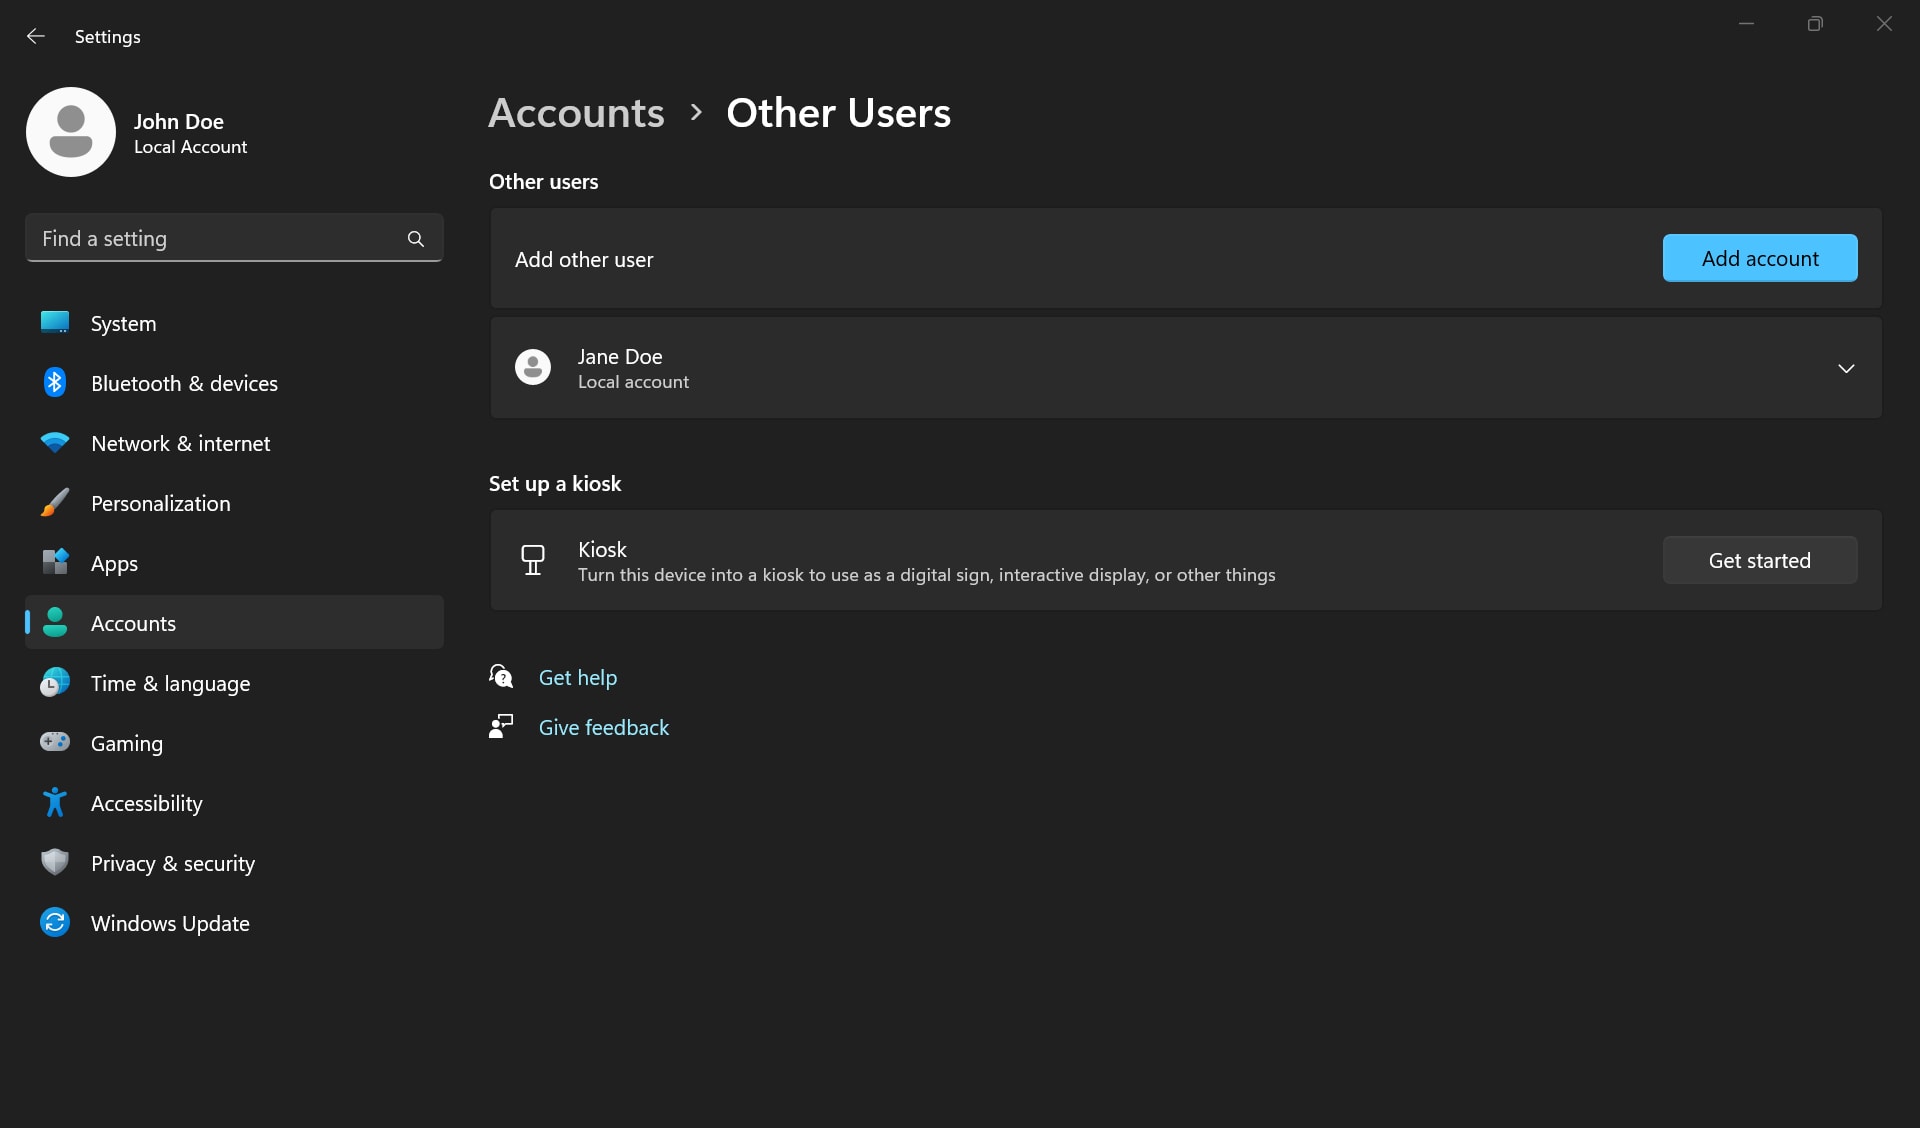 Add account button under the Other user settings in Windows